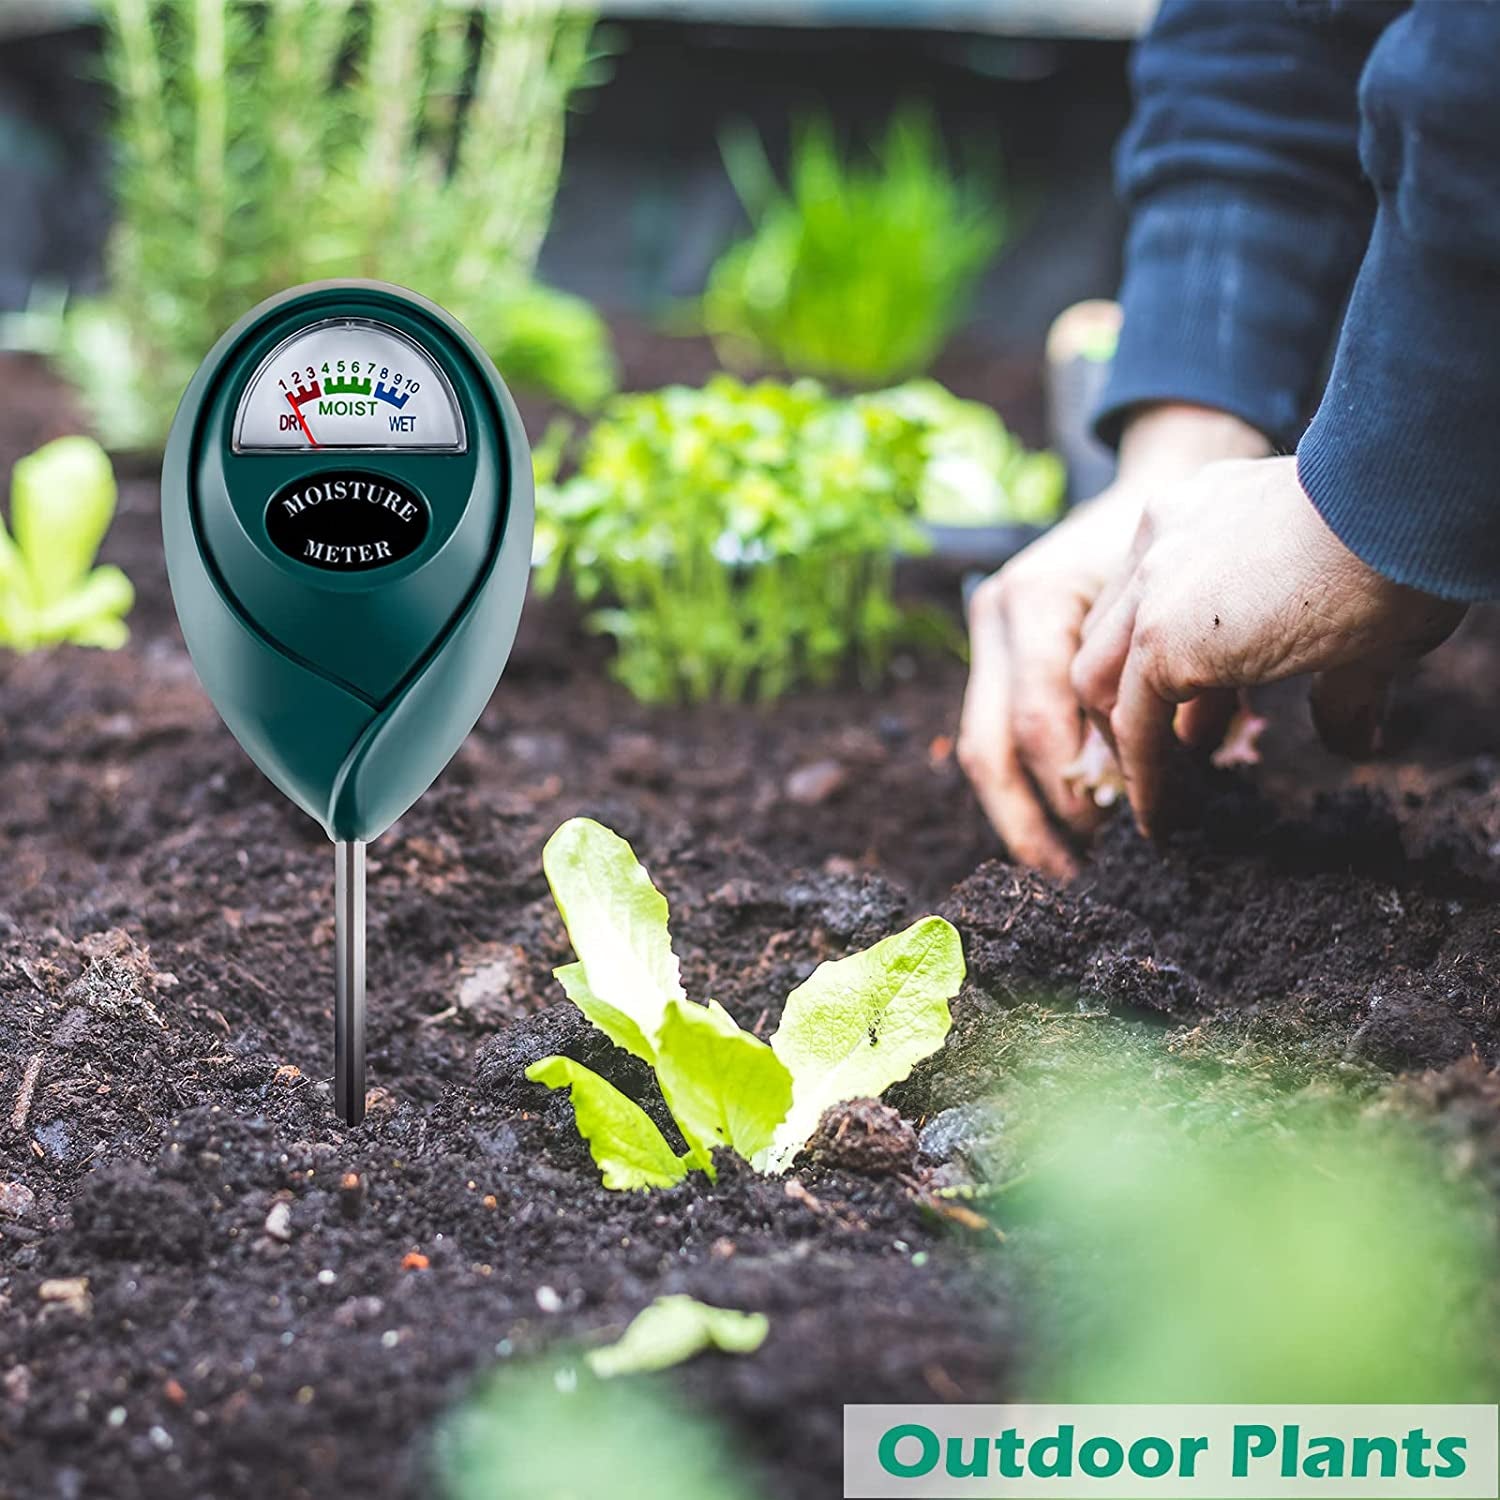 Soil Moisture Meter for House Plants, Plant Water Meter,Plant Moisture Meter for House Plants and Outdoor Plants, No Batteries Required (Green)